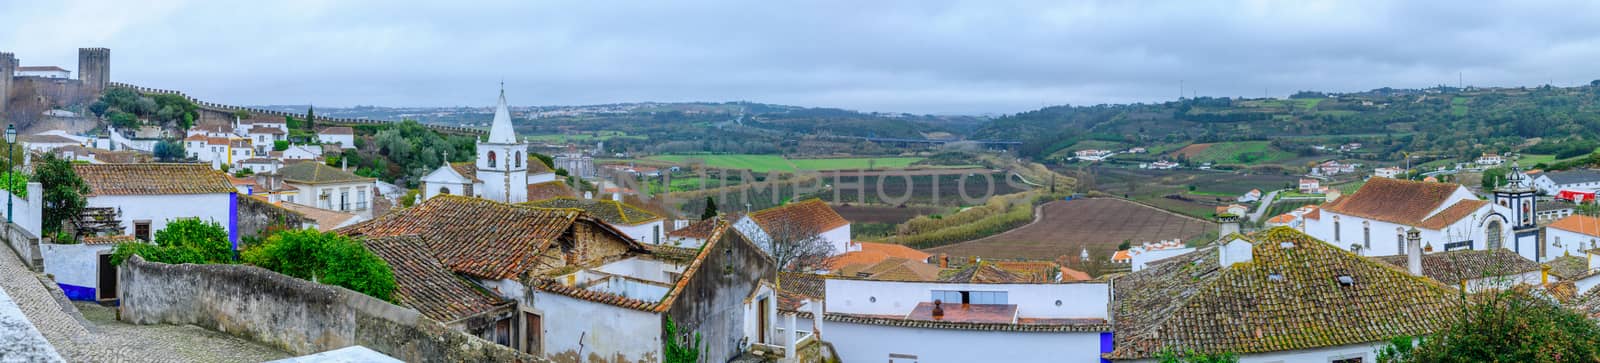 Panoramic view of the old town, with rooftops, and nearby countryside, in Obidos, Portugal